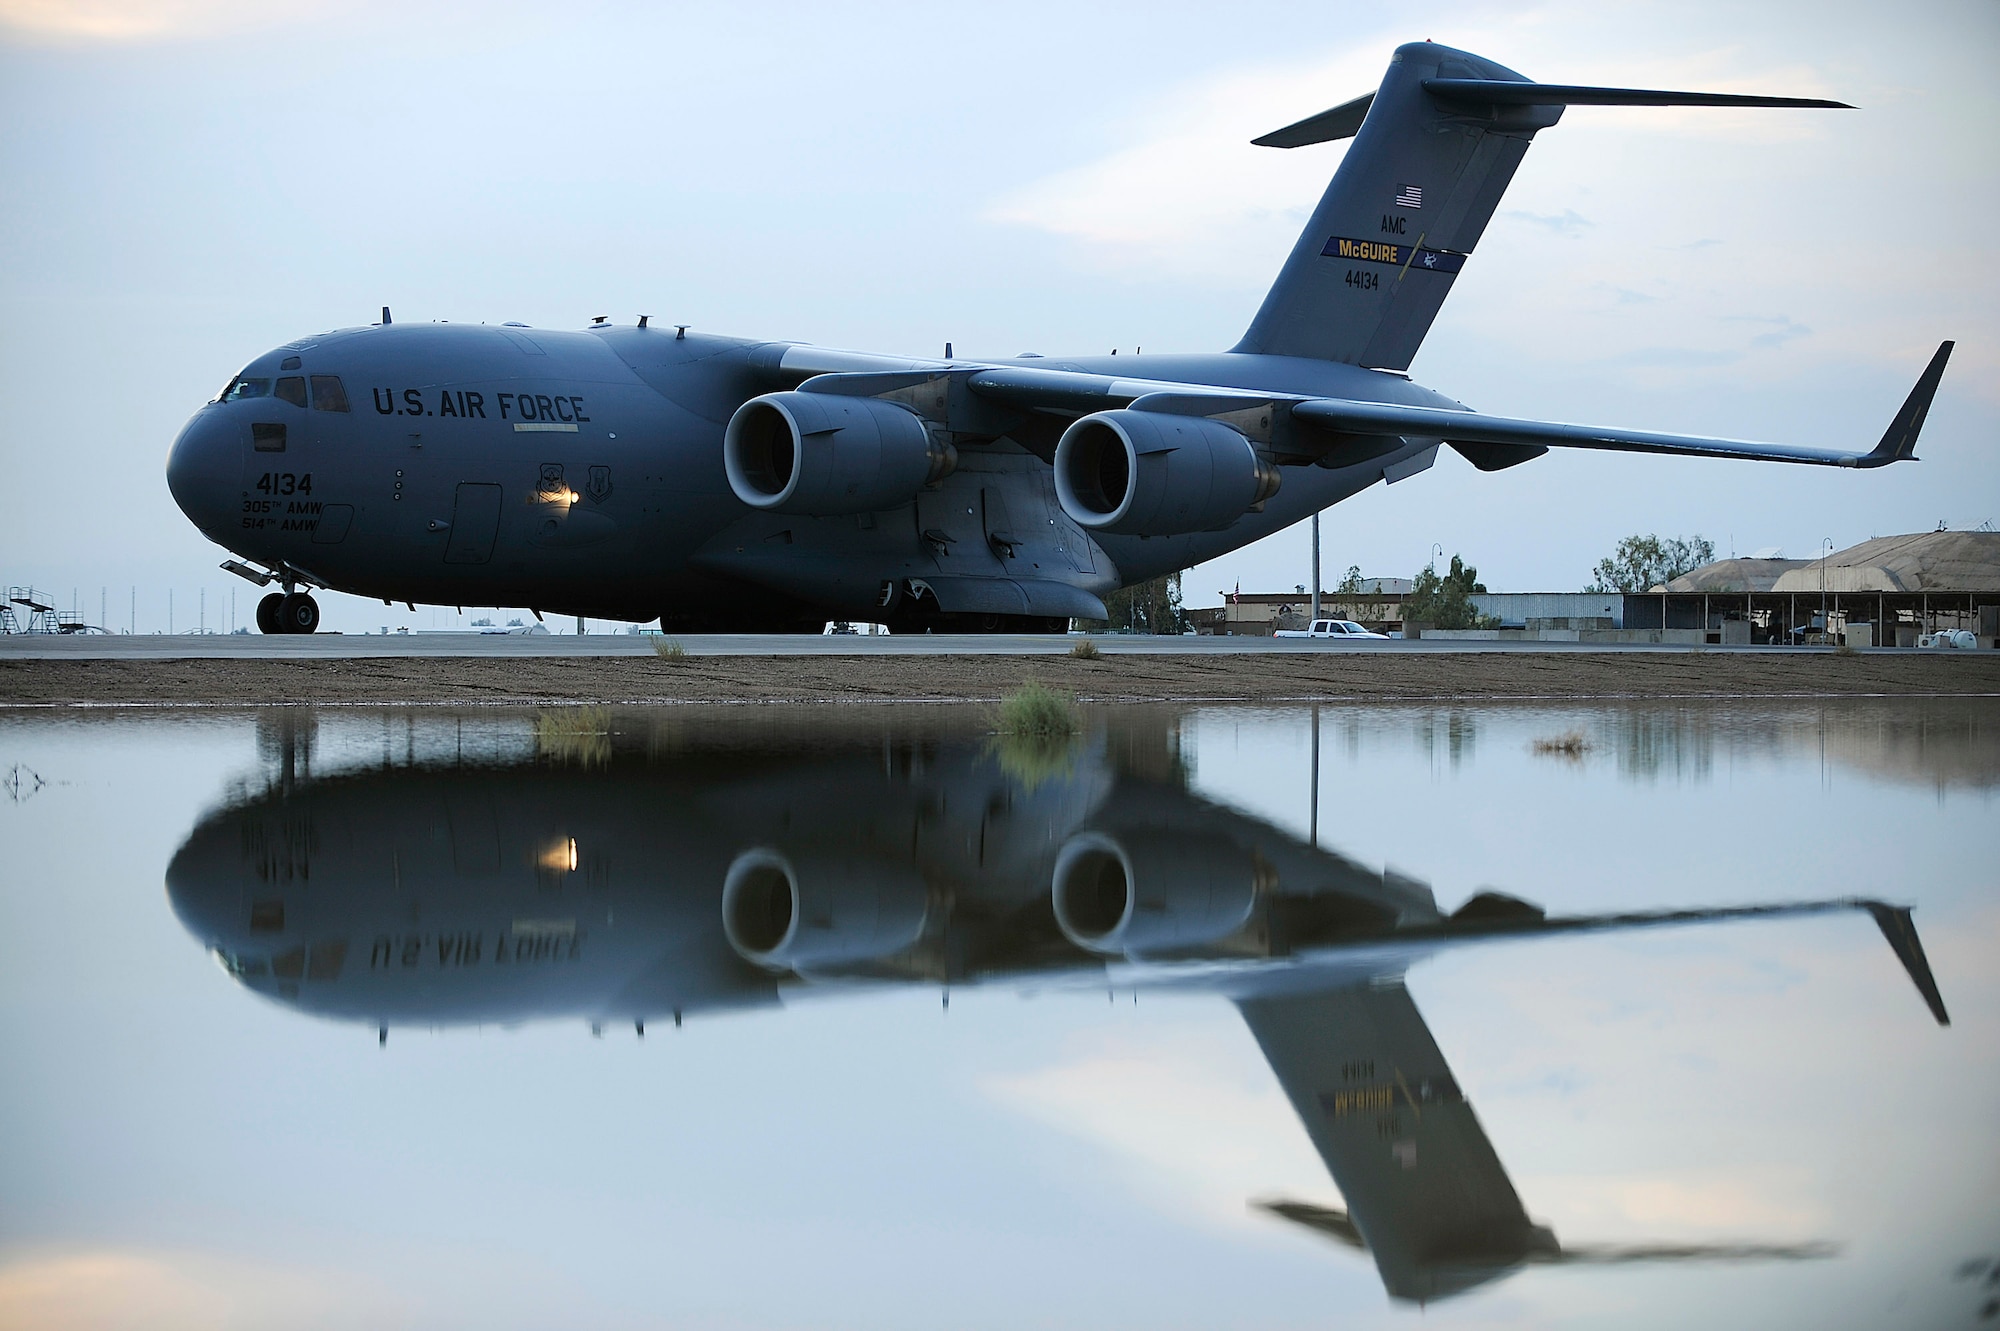 A C-17 Globemaster III taxis after landing at an air base in Southwest Asia. The C-17 performs tactical airlift and airdrop missions, transports passengers, performs medical evacuations, delivers troop resupply and all types of cargo throughout Southwest Asia in support of operations Enduring Freedom and Iraqi Freedom. (U.S. Air Force photo/Airman 1st Class Jason Epley)